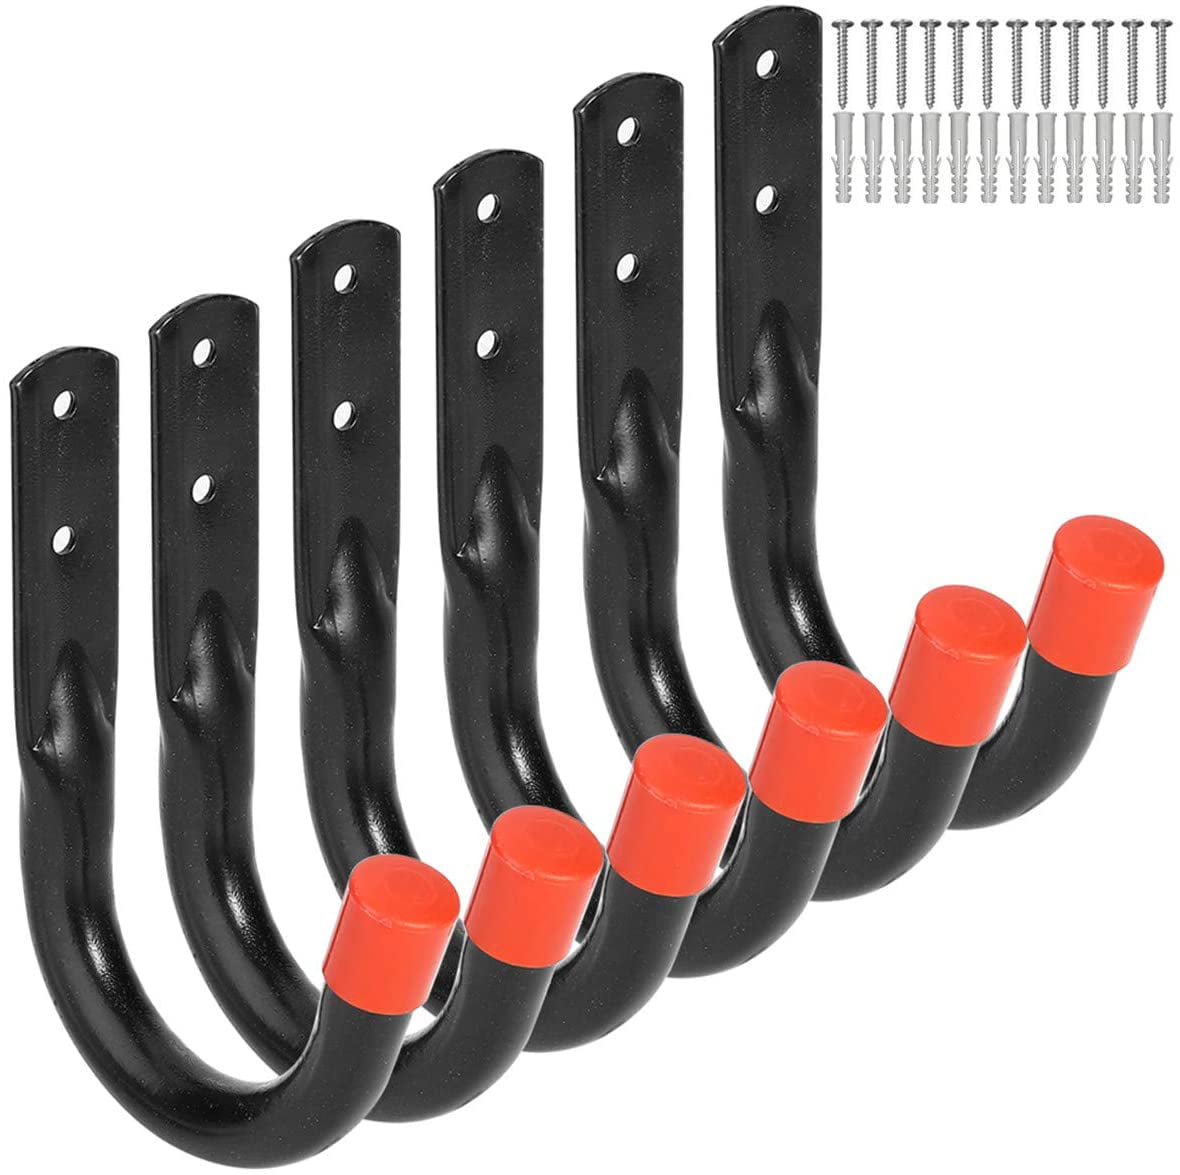 Garage Storage Utility Hooks and Hangers Heavy Duty Wall Mount Tool Holder 14pc 